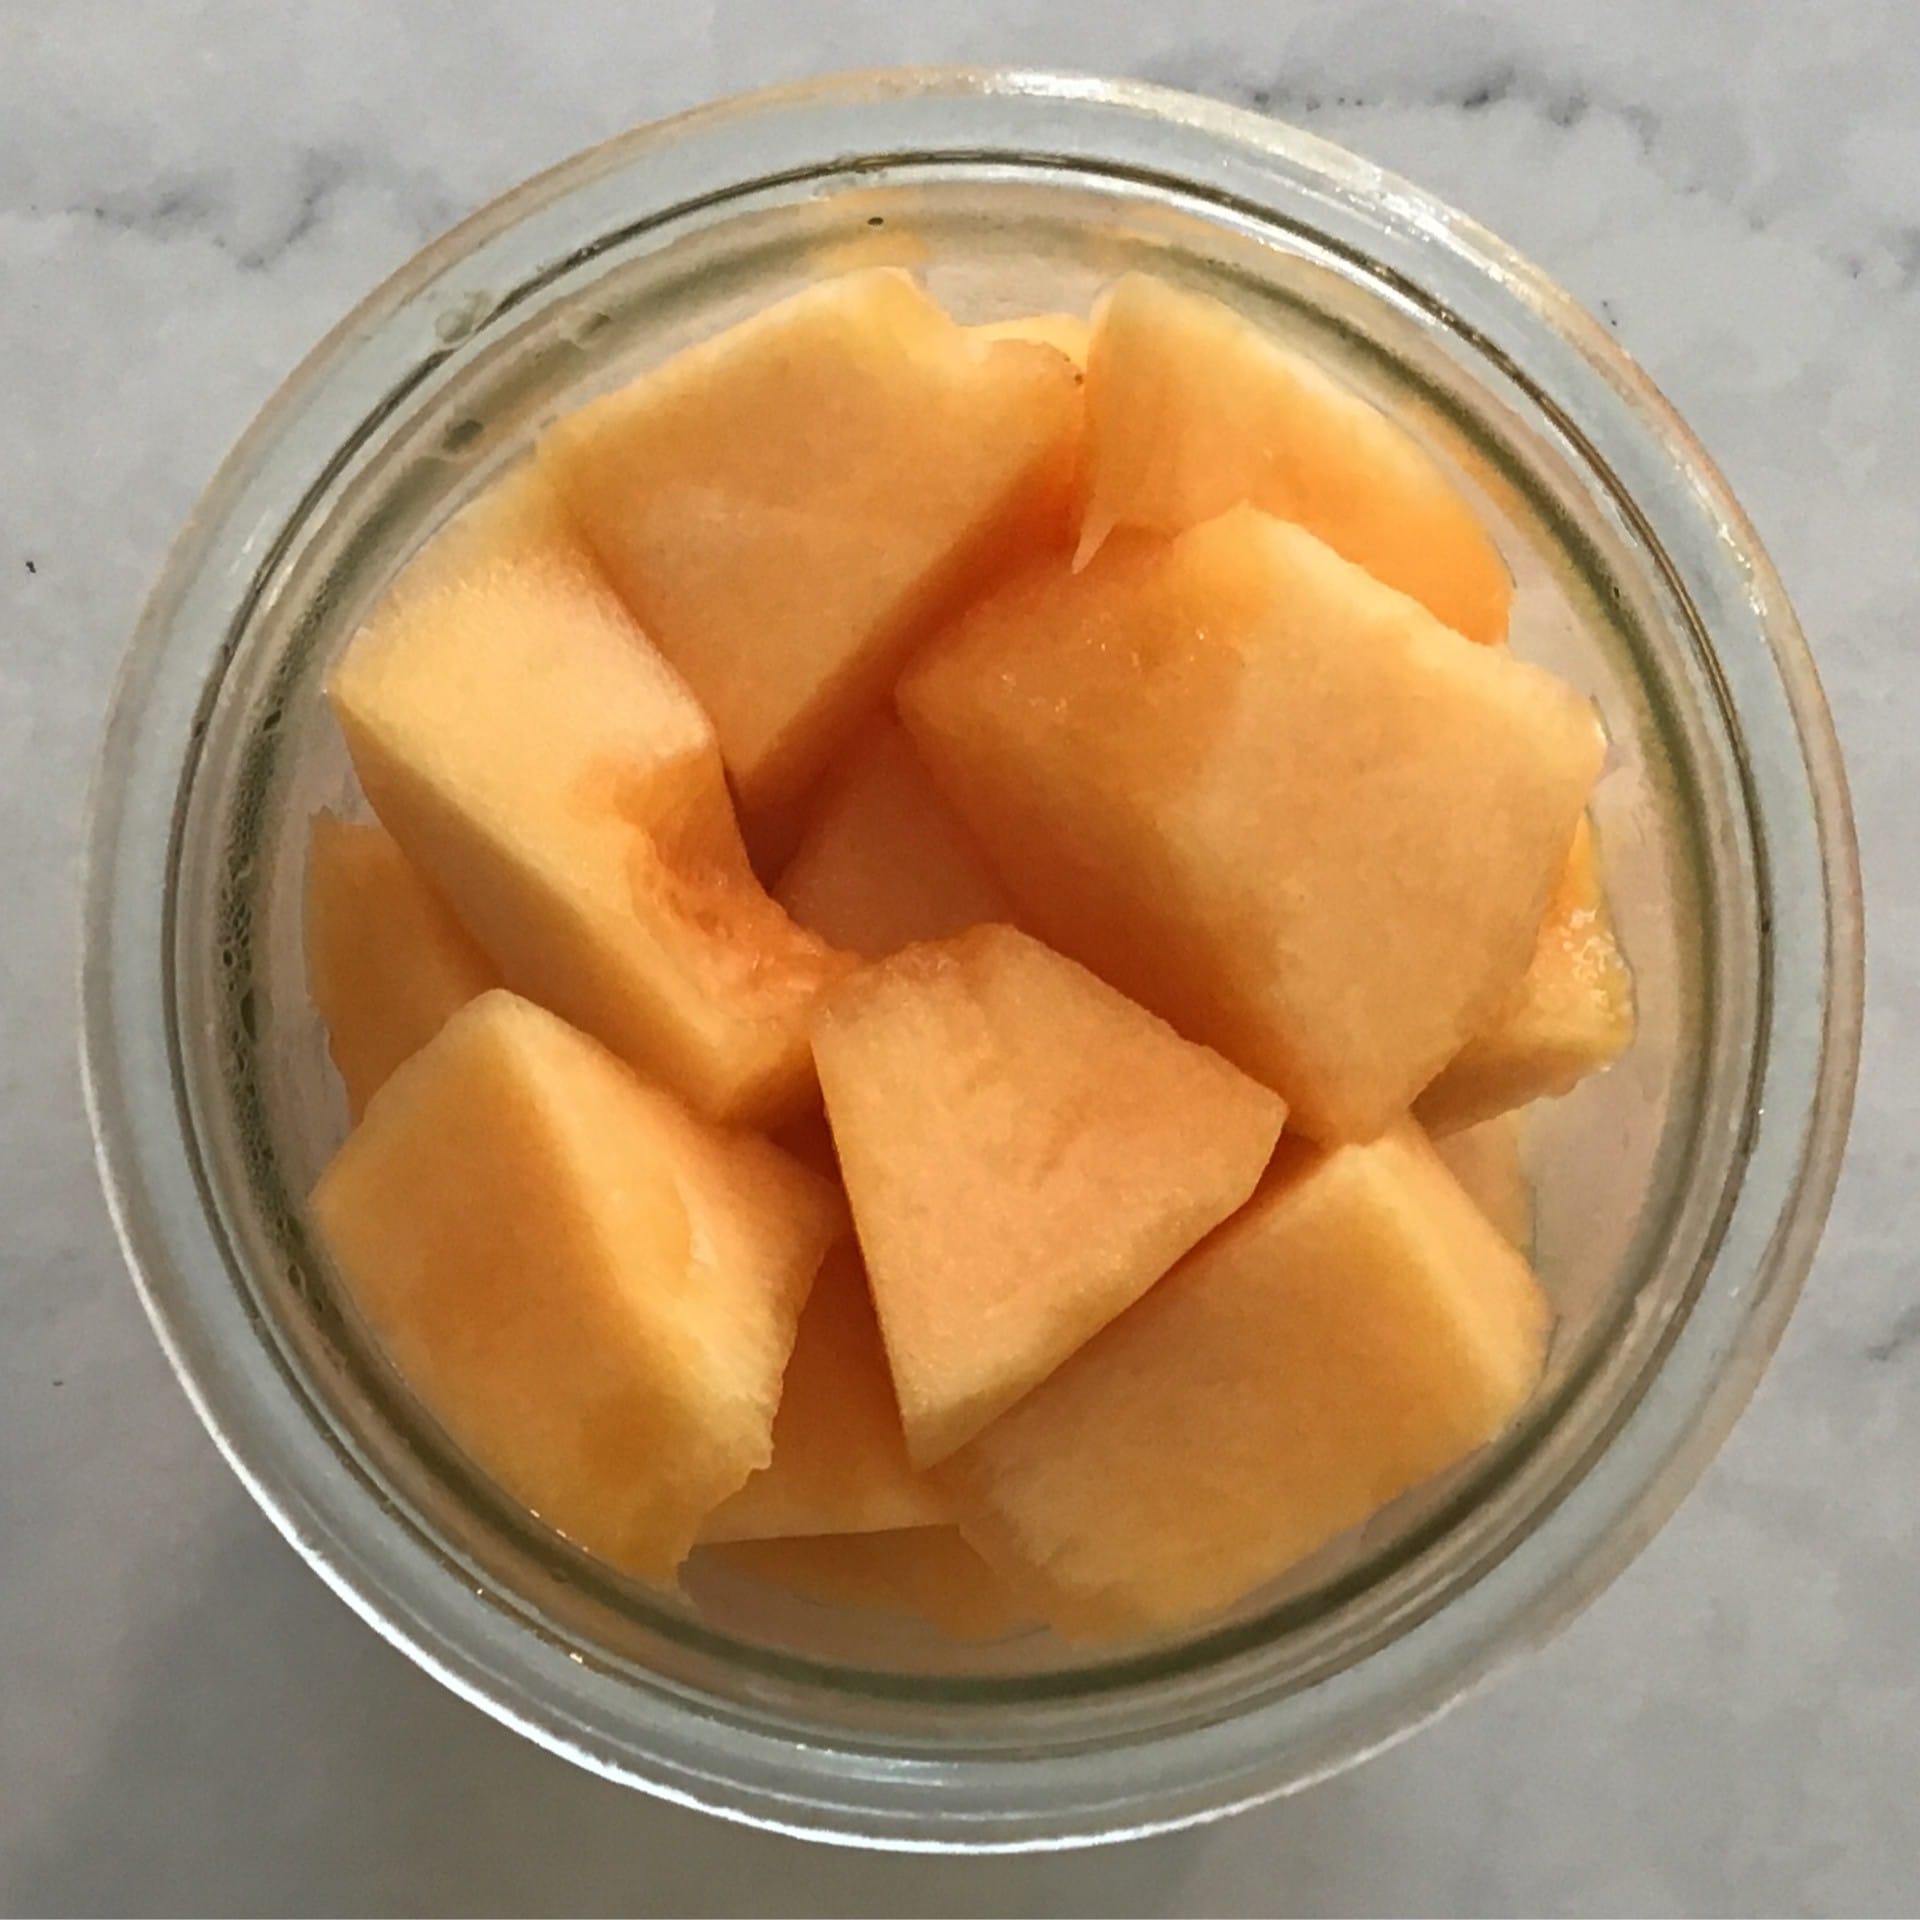 sold out sliced cantaloupe local